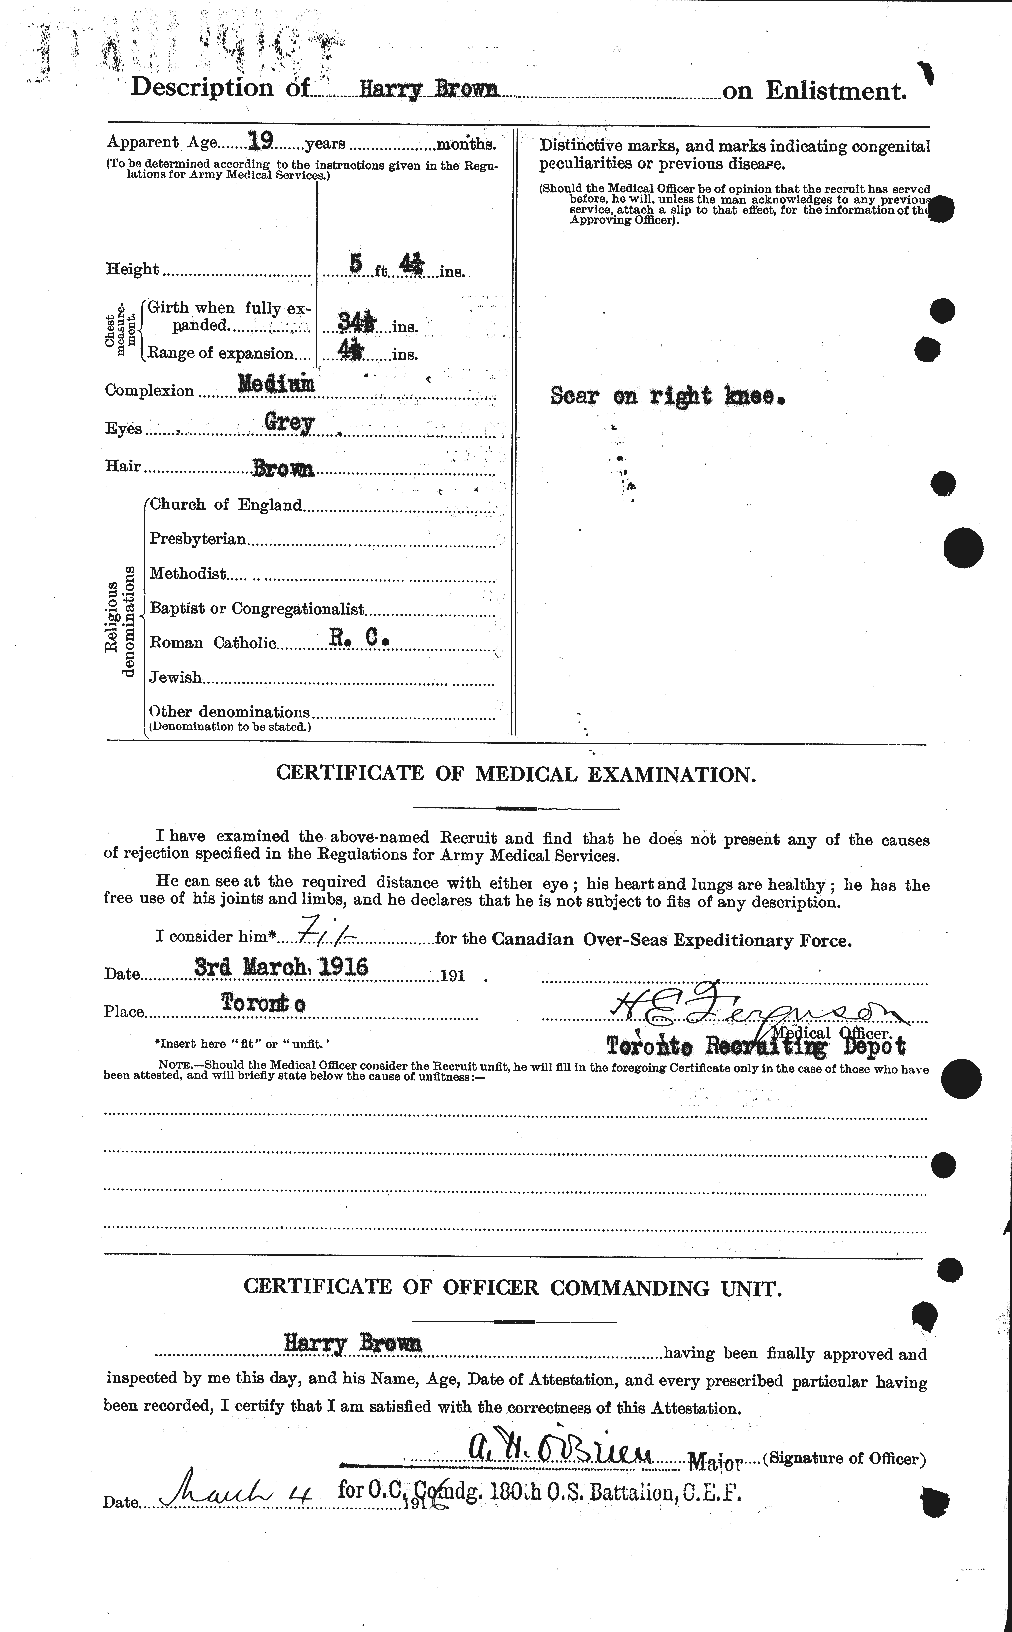 Personnel Records of the First World War - CEF 265386b